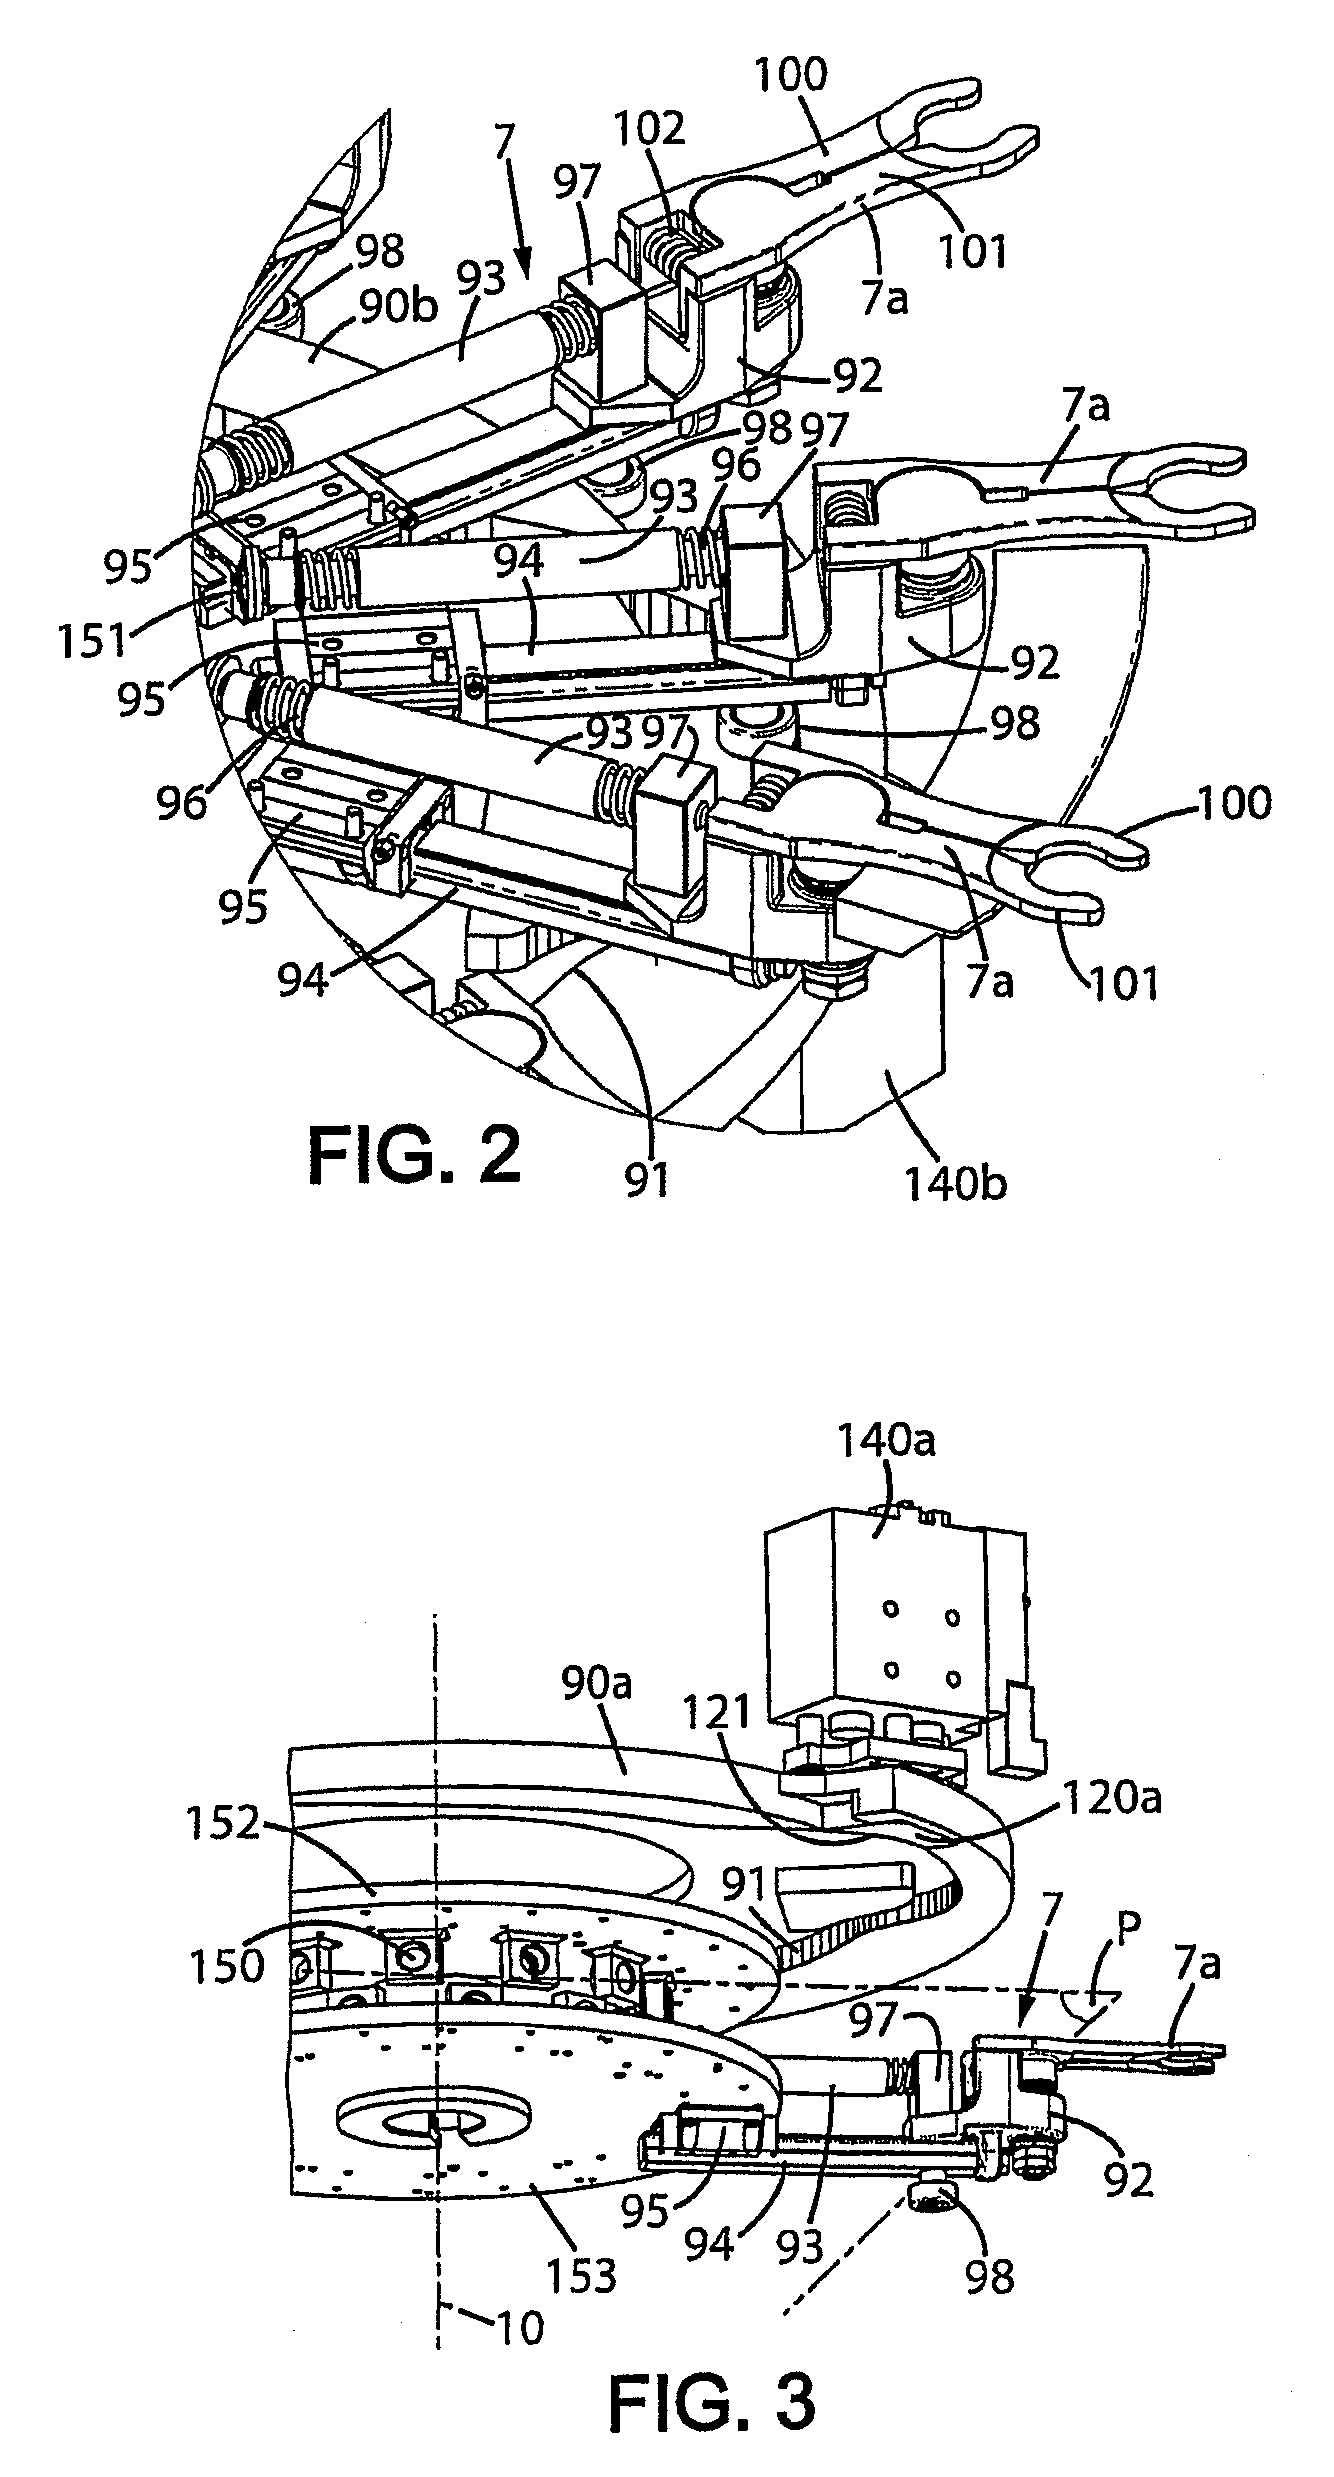 Container switching device